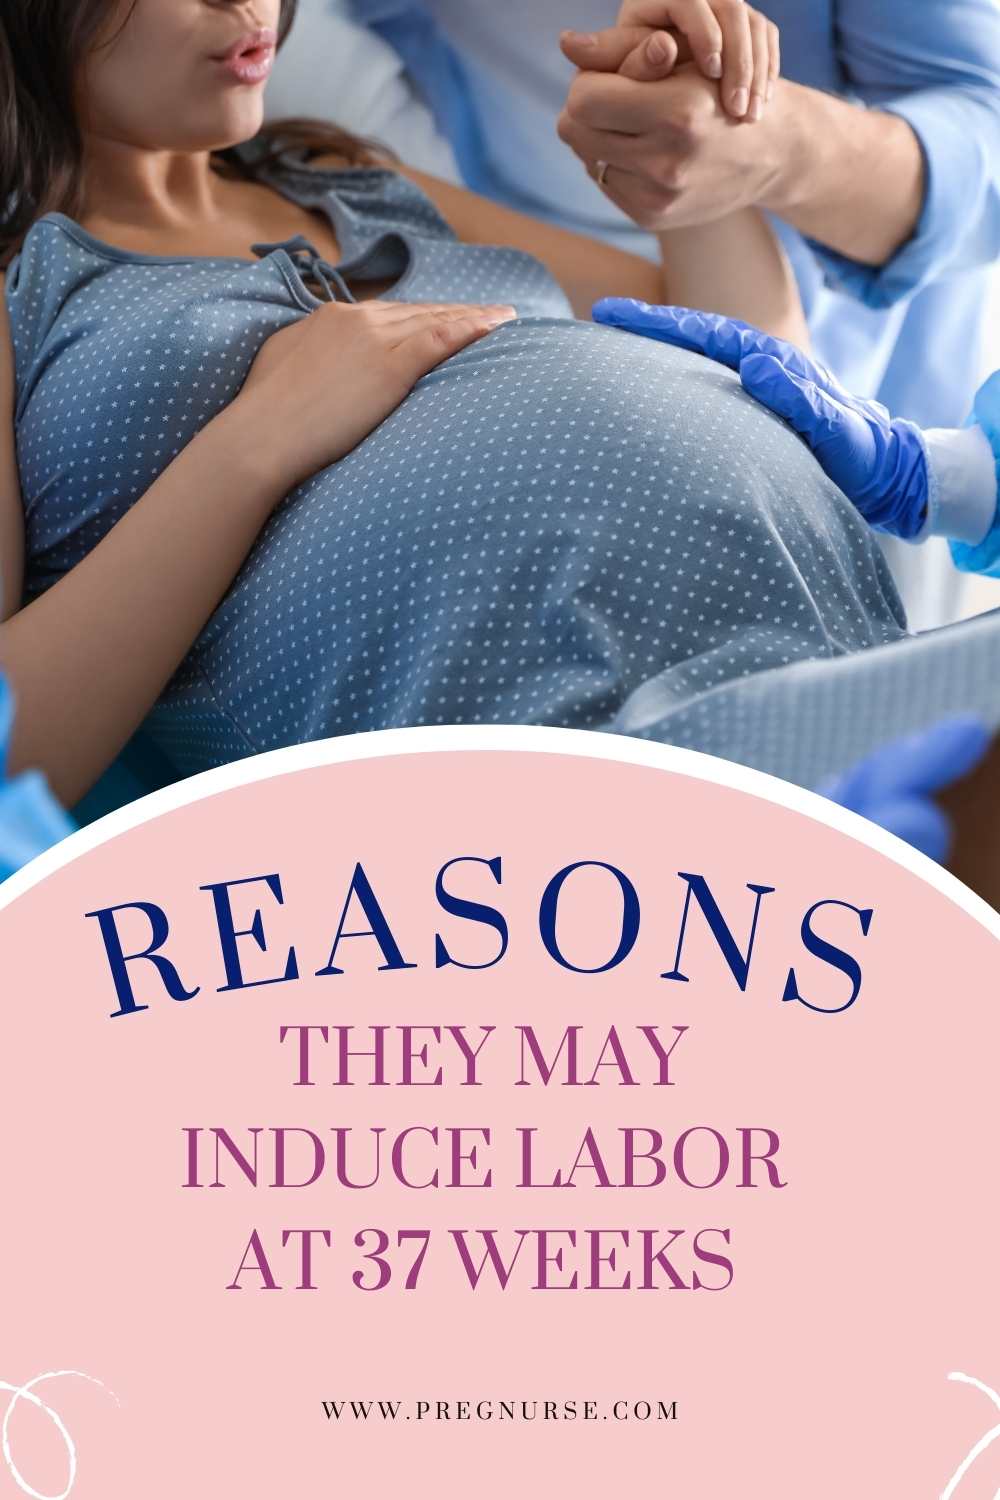 Did you know that doctors might induce labor at 37 weeks of pregnancy? Explore the top reasons, potential risks, and benefits of early induction in our informative article. Induced Labor hospital tips!